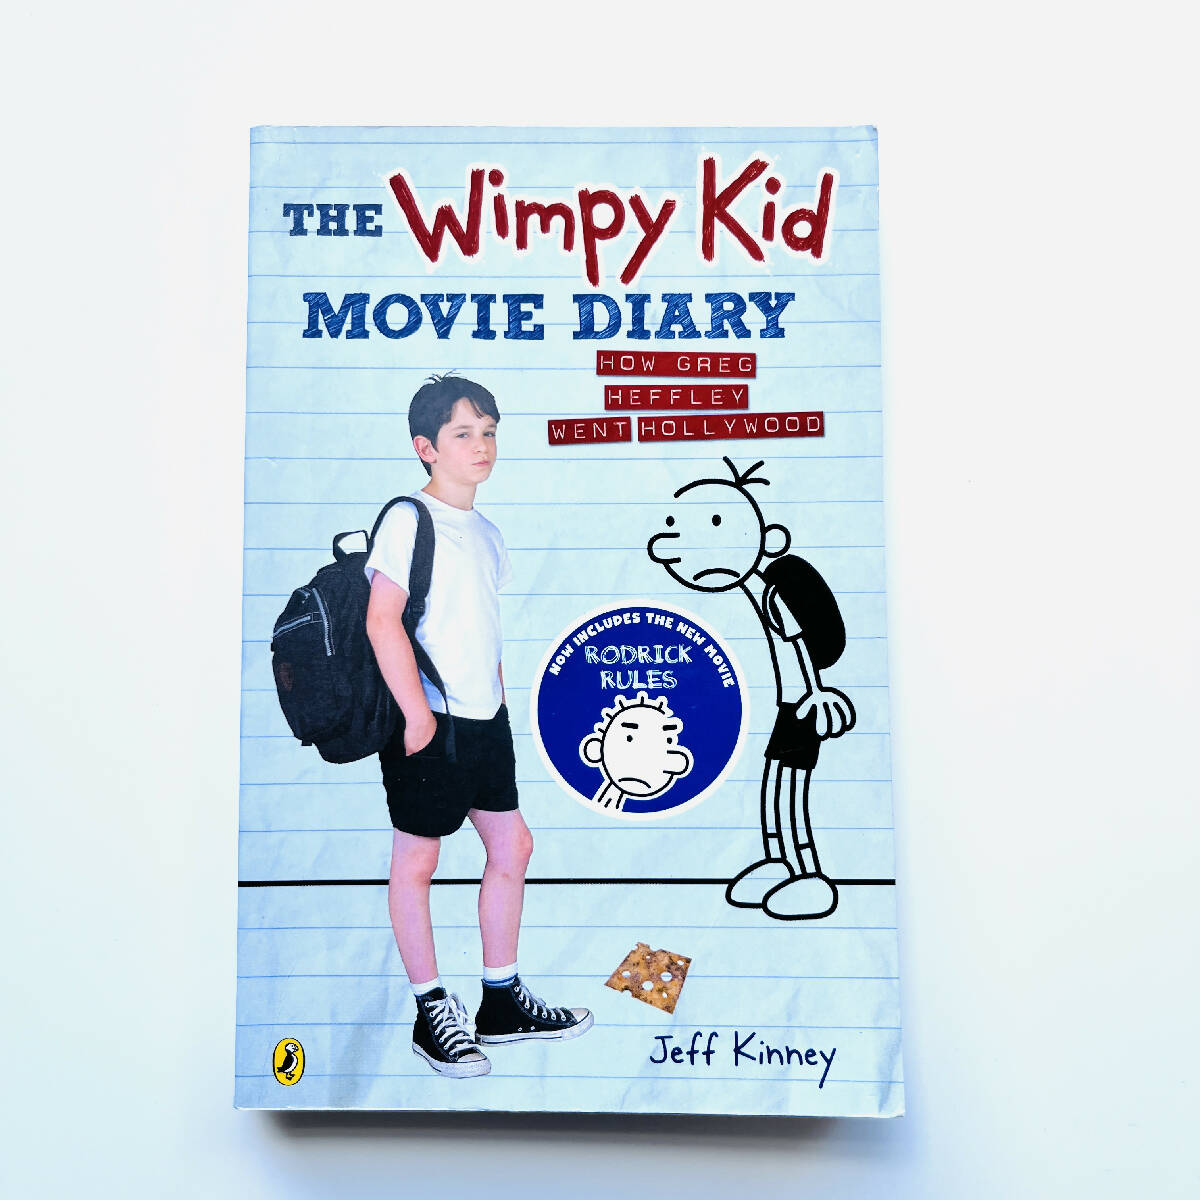 Diary of a wimpy kid-greg heffley (book 1)